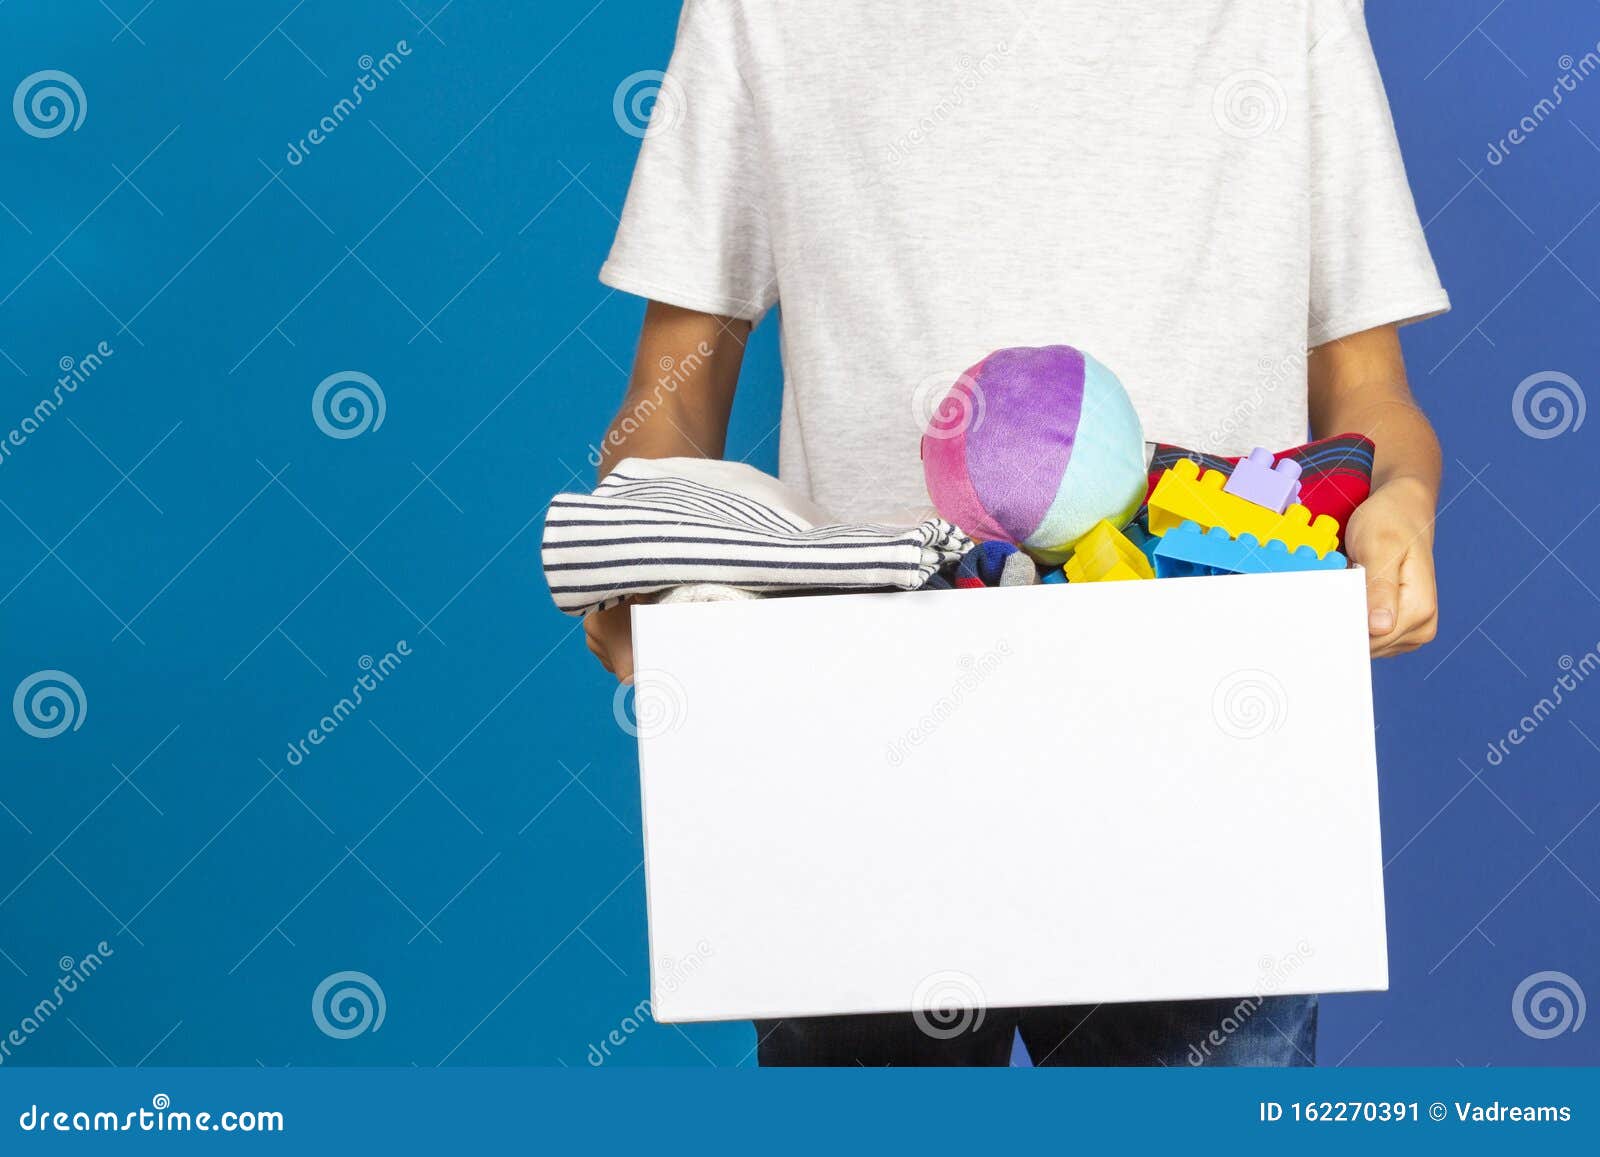 Donation Concept. Kid Hands Holding Donate Box Full Of Books, Clothes And Toys Near Blue ...